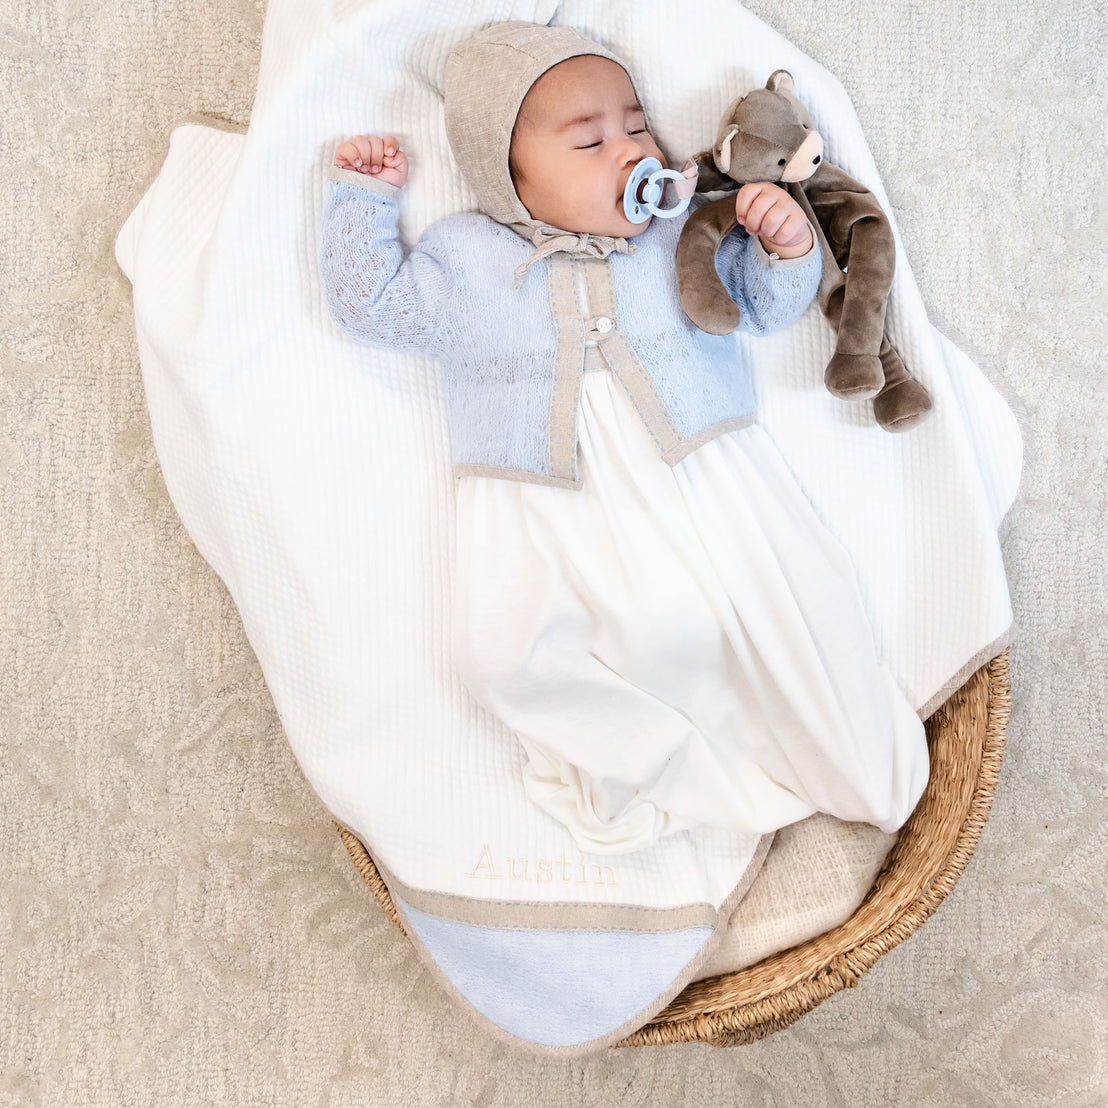 A newborn baby, wearing an Austin Linen Bonnet and an upscale blue knit onesie, peacefully sleeps in a woven basket with a white blanket, holding a teddy bear, with a pacifier in mouth.